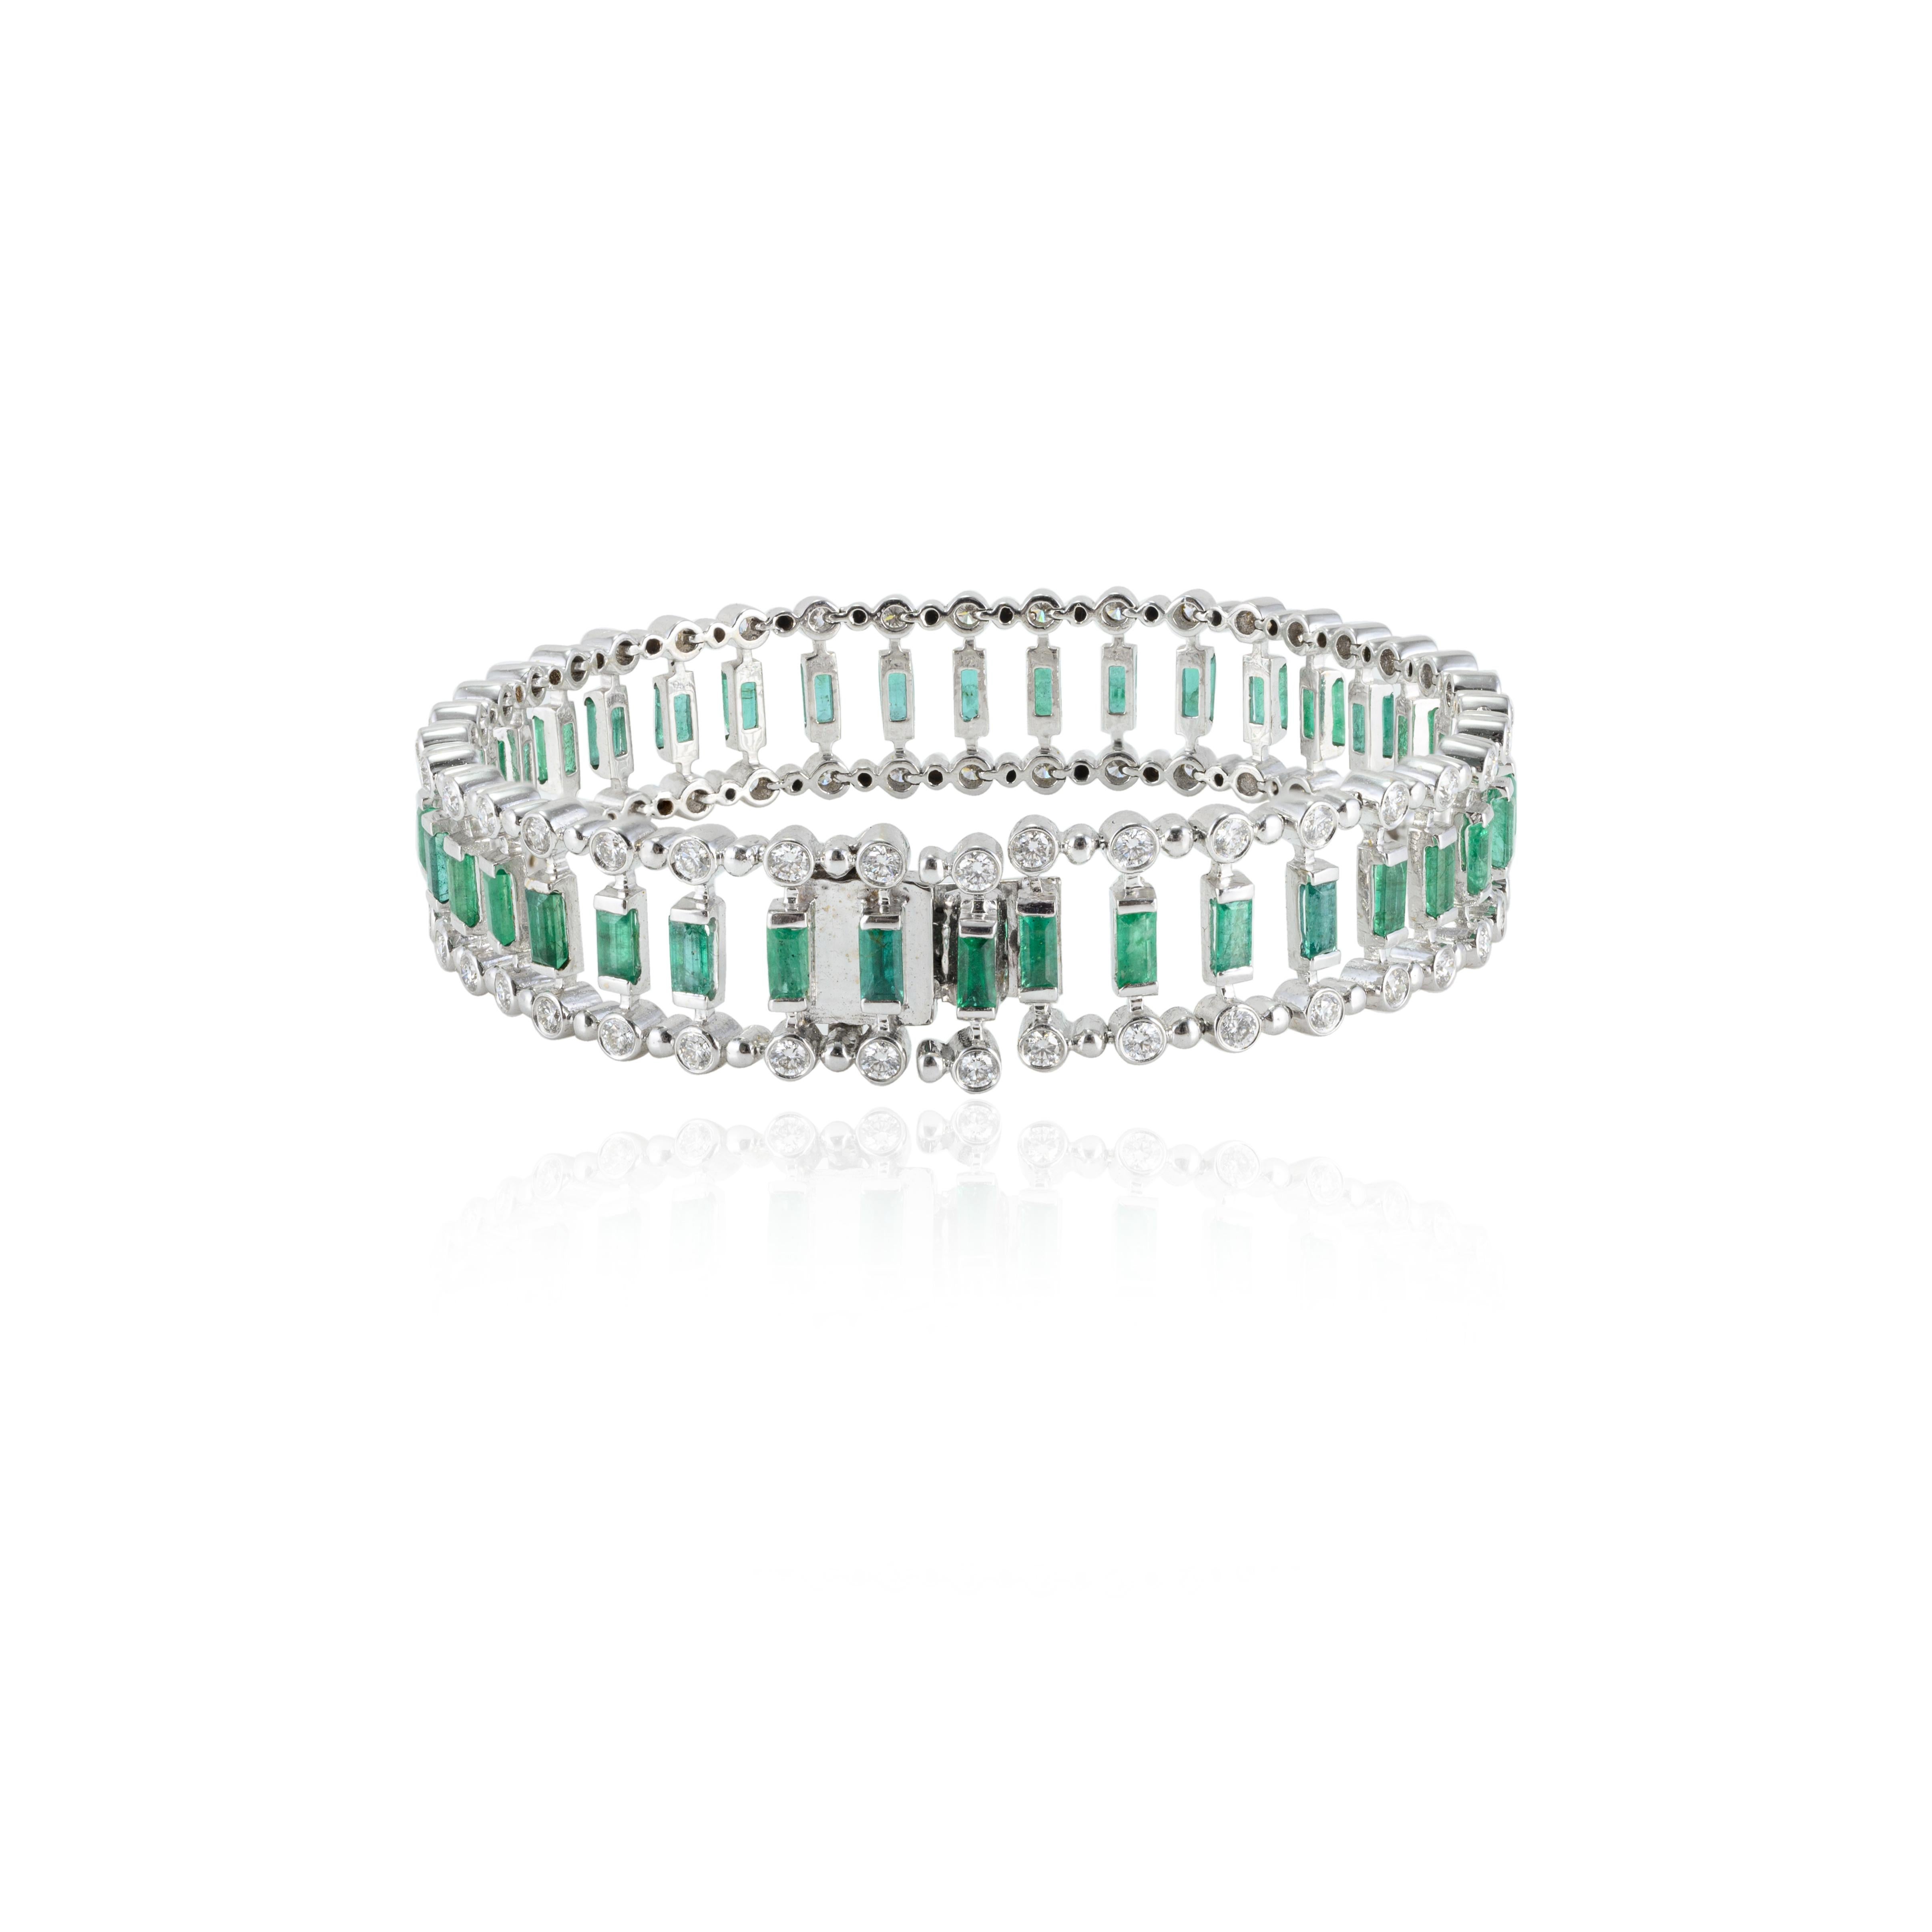 This 4.37 Carat Baguette Emerald and Diamond Wedding Bracelet in 18K gold showcases endlessly sparkling natural emerald, weighing 4.37 carat and diamonds weighing 2.1 carat. It measures 6.5 inches long in length. 
Emerald enhances intellectual